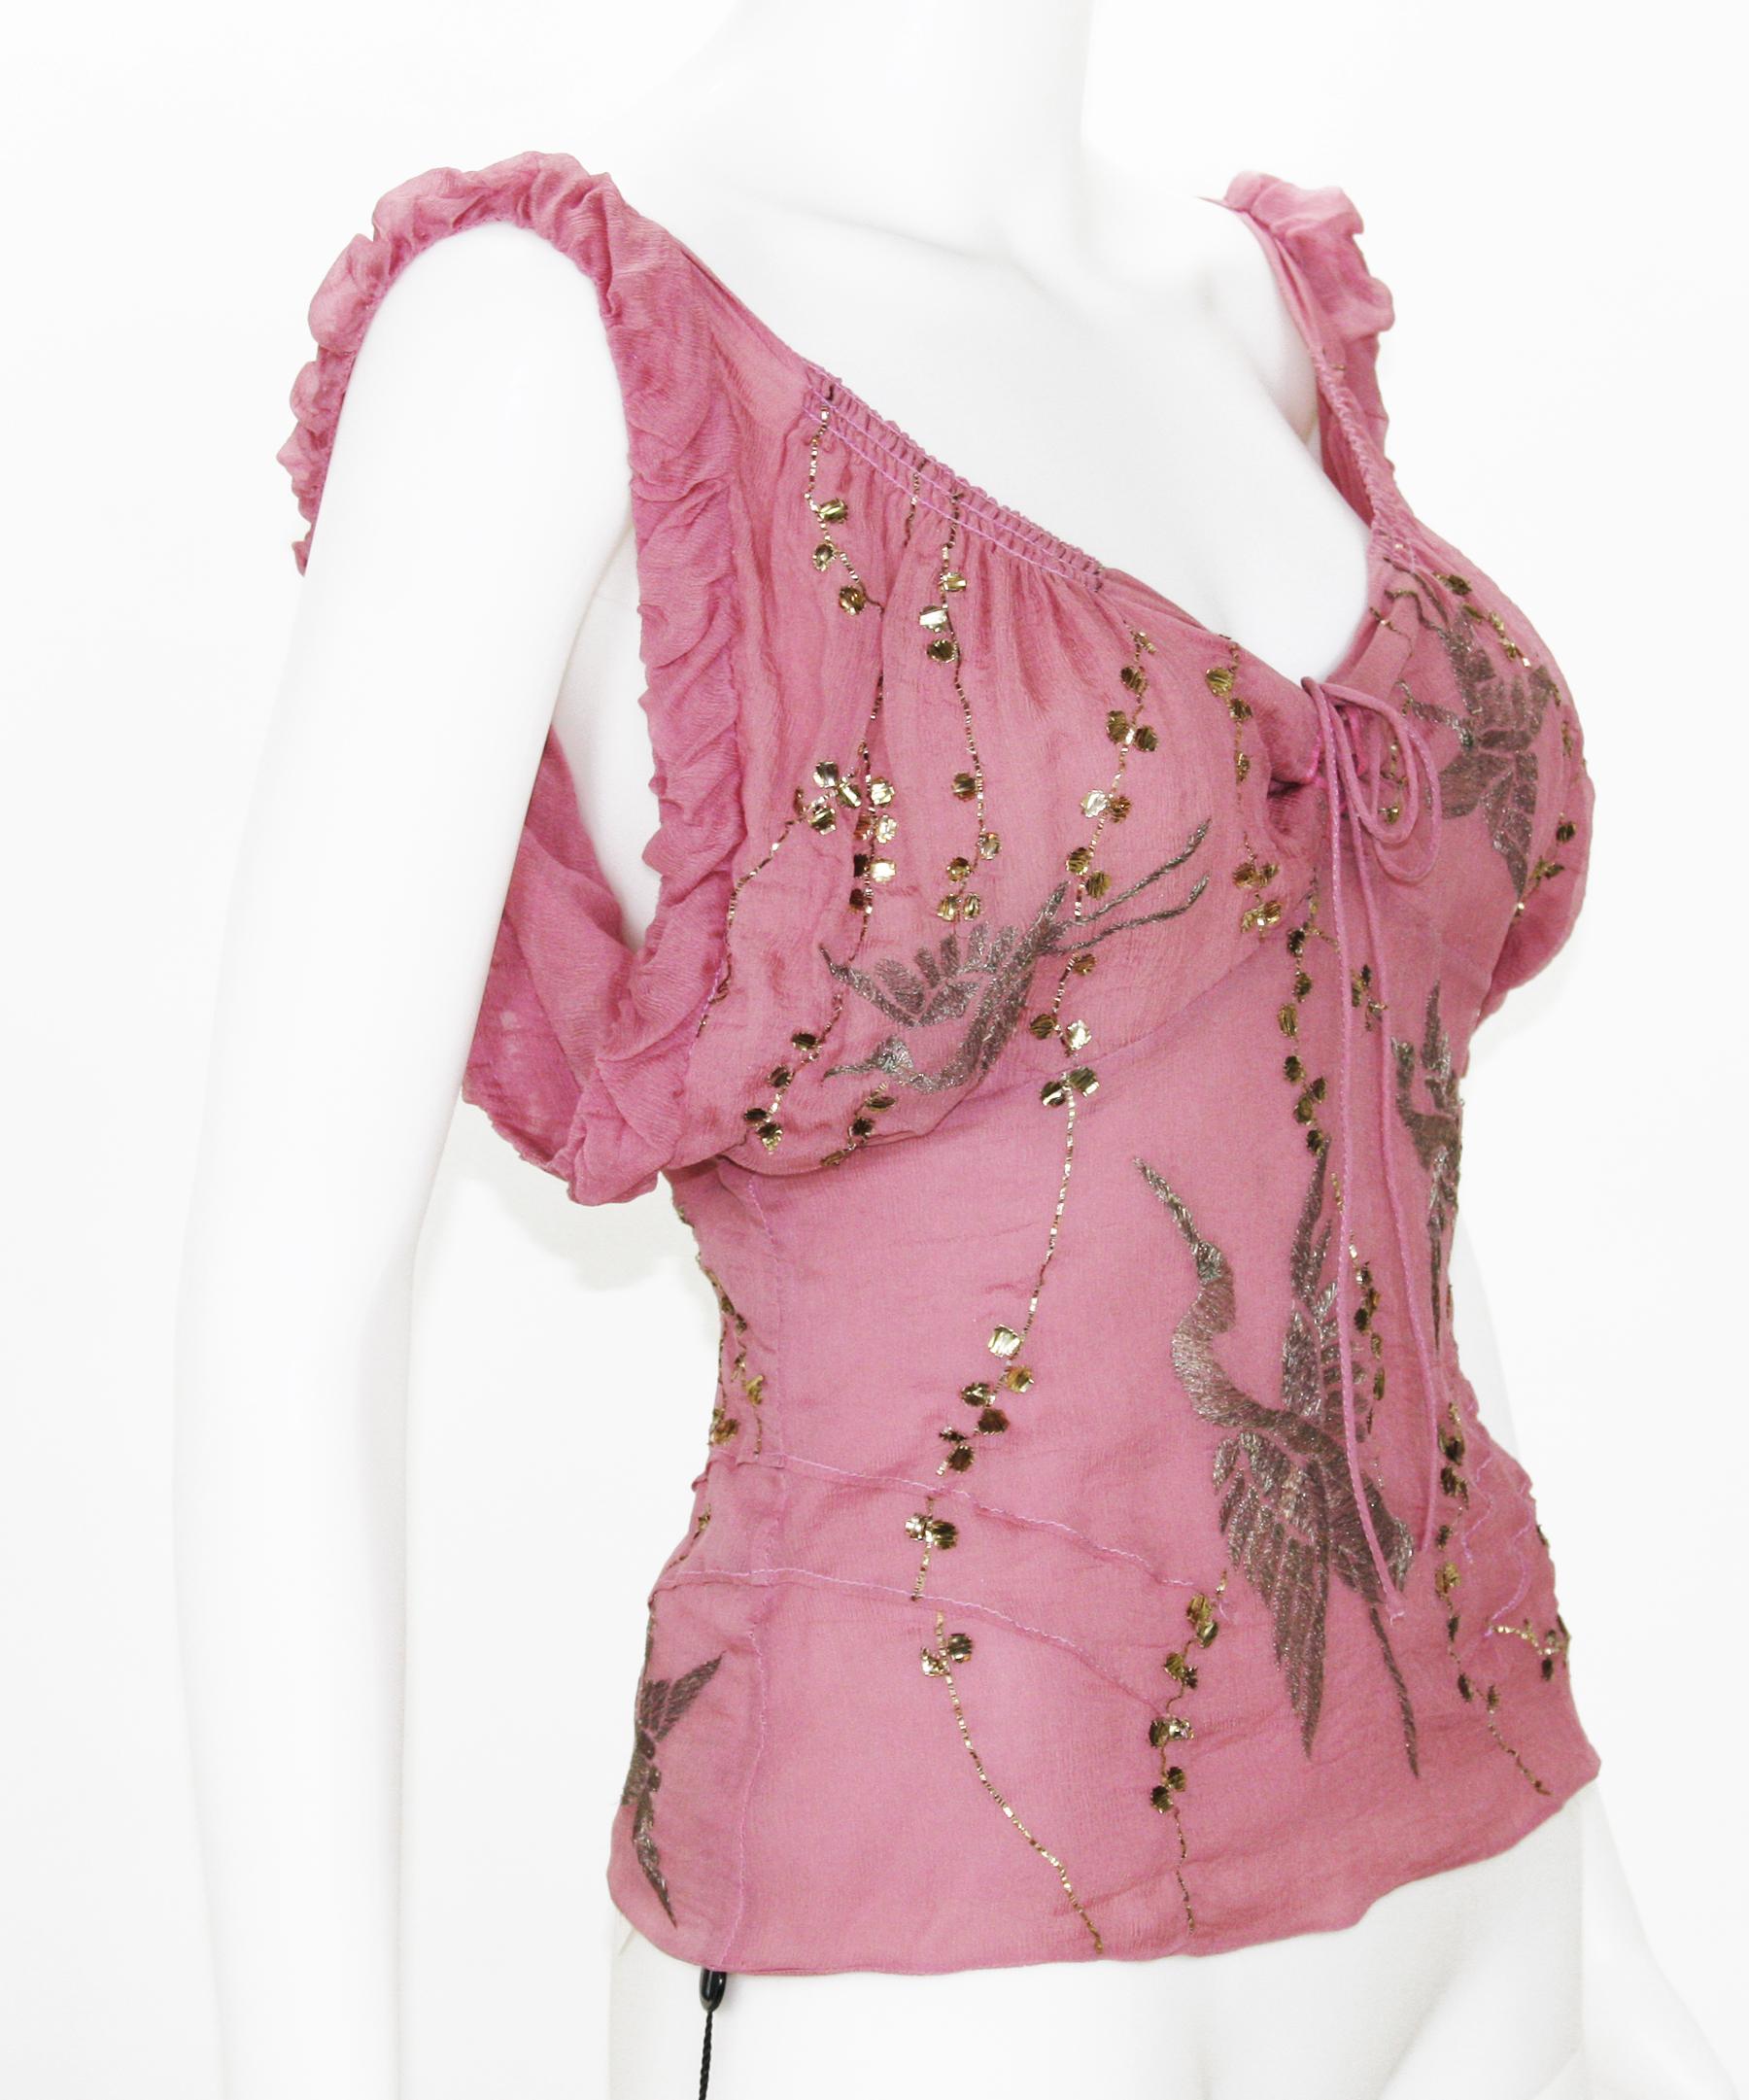 Super Rare - New Tom Ford for Gucci Silk Fully Embellished Top
S/S 2003 Collection
Italian size - 40
Color : Violet - Old Rose
100% Silk, Metallic Silver-Tone Threads Crane Bird Embroidery, Gold-Tone Sequins. 
Double Layered, Side Snaps